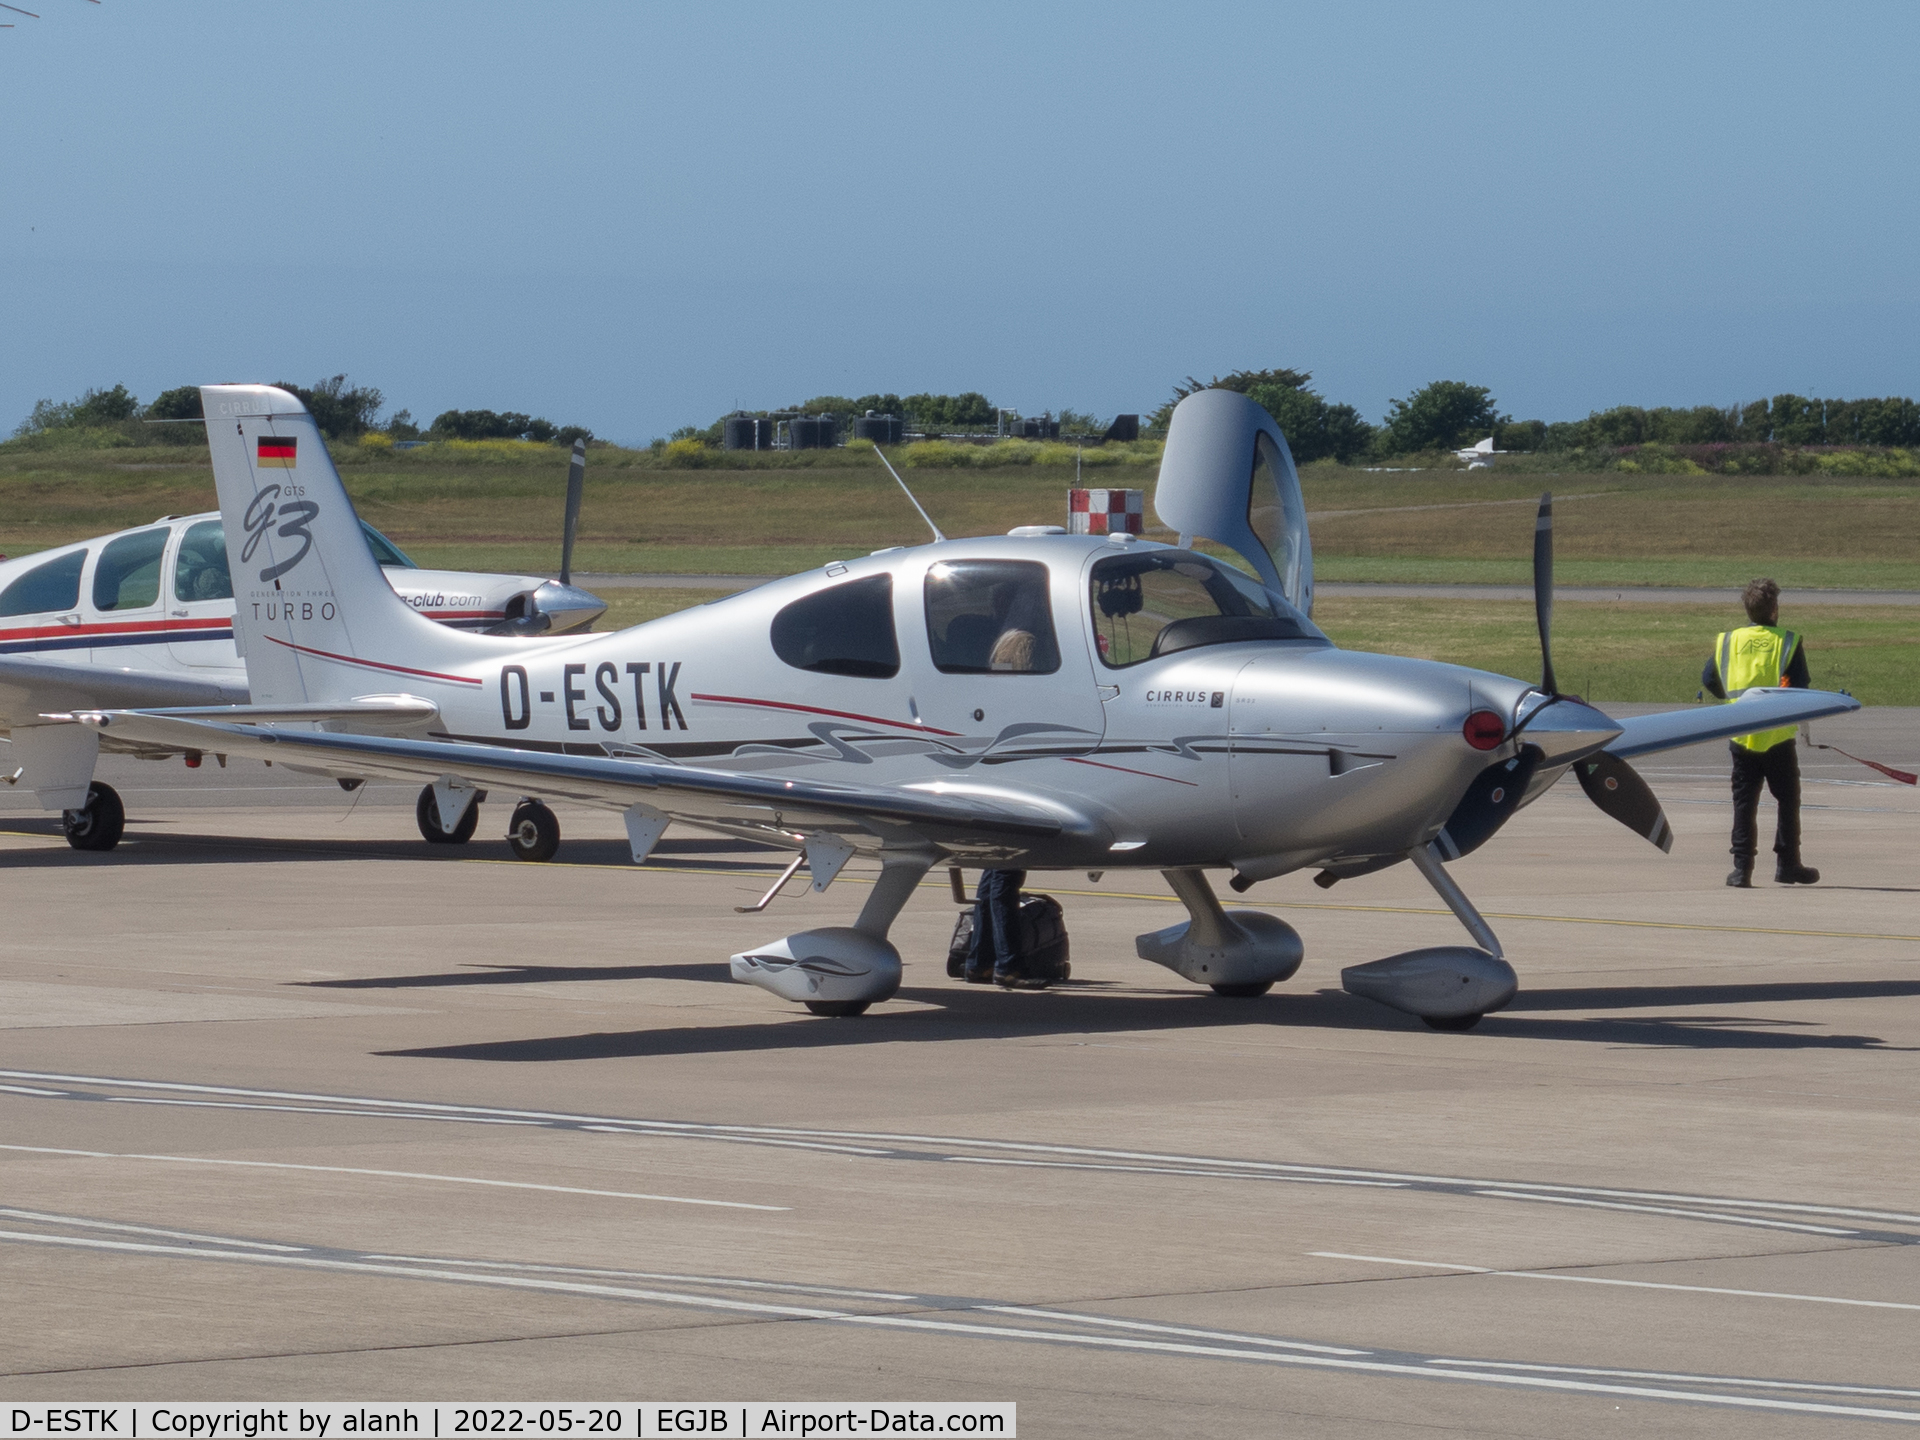 D-ESTK, 2007 Cirrus SR22 G3 GTS Turbo C/N 2688, Arrived in Guernsey on tour after a flight from Jersey